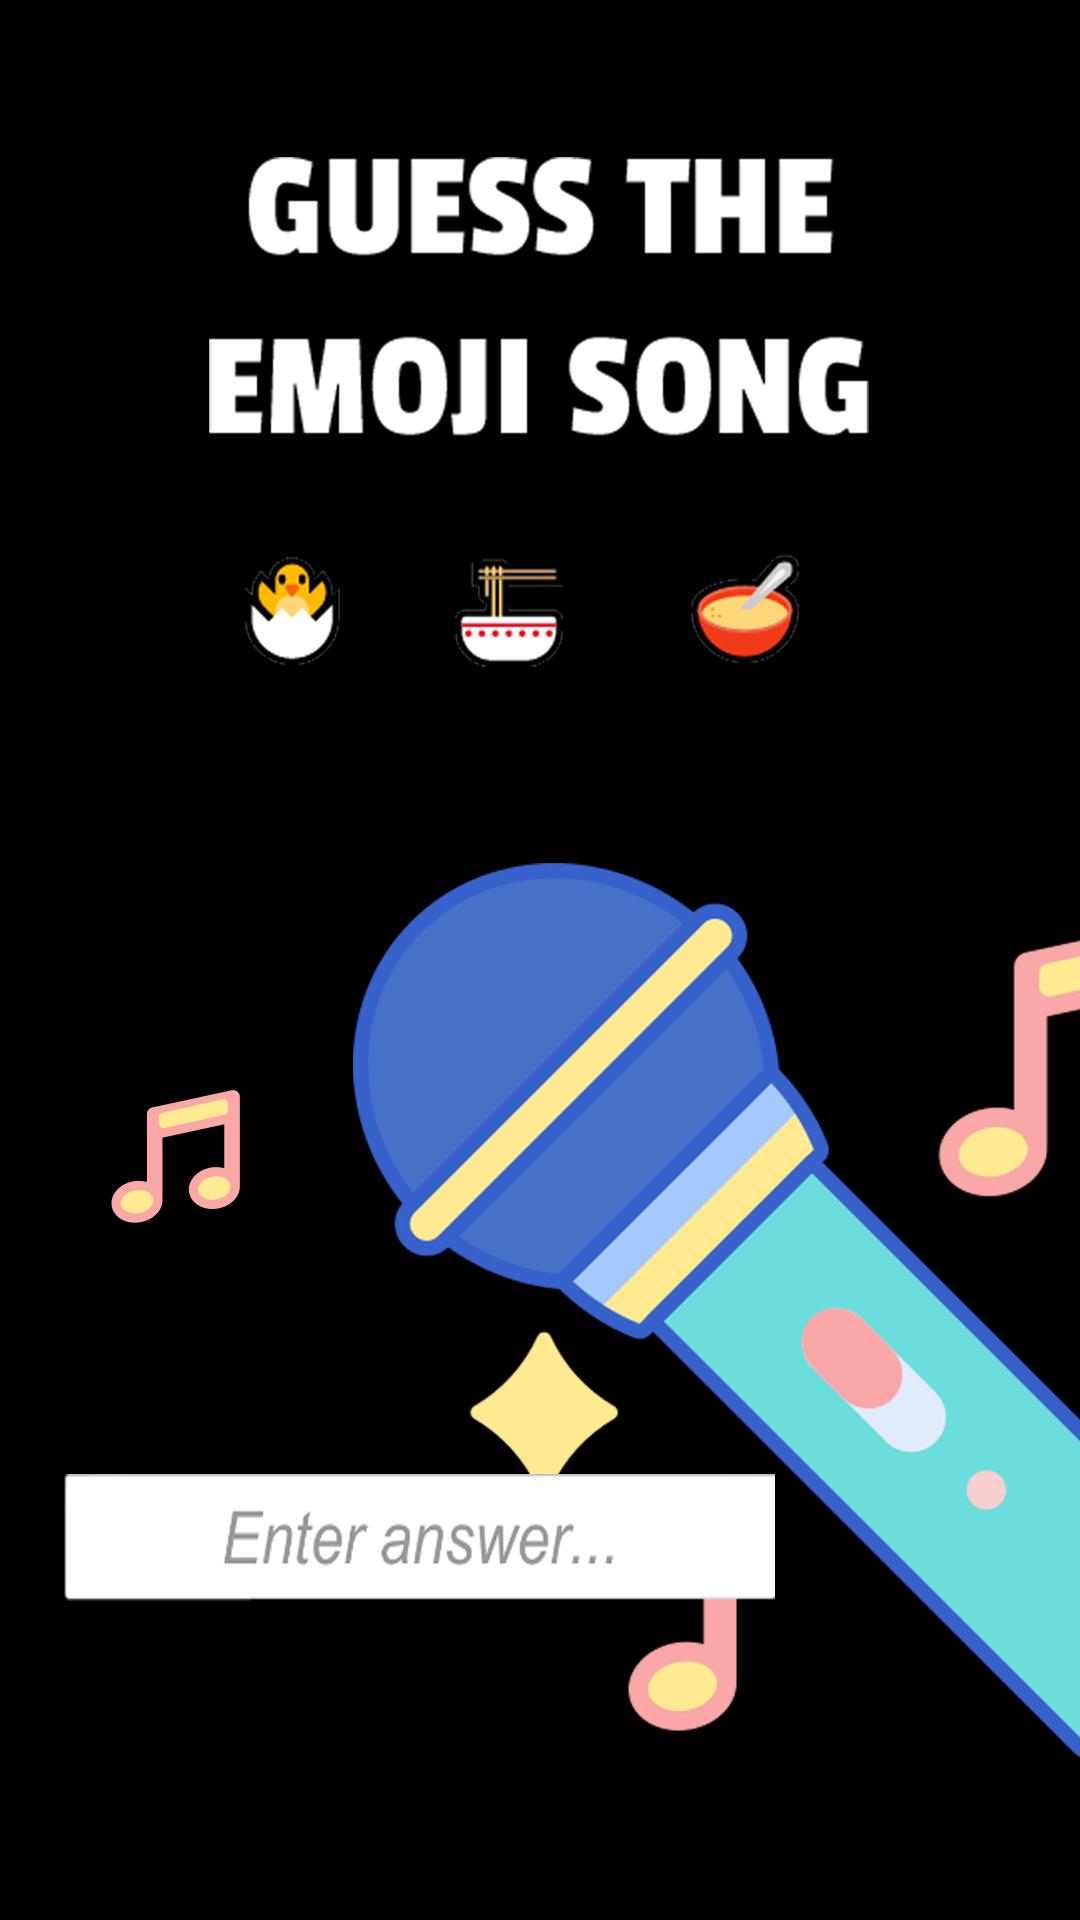 KPOP QUIZ 2020 - Guess the Kpop song for Android - APK Download